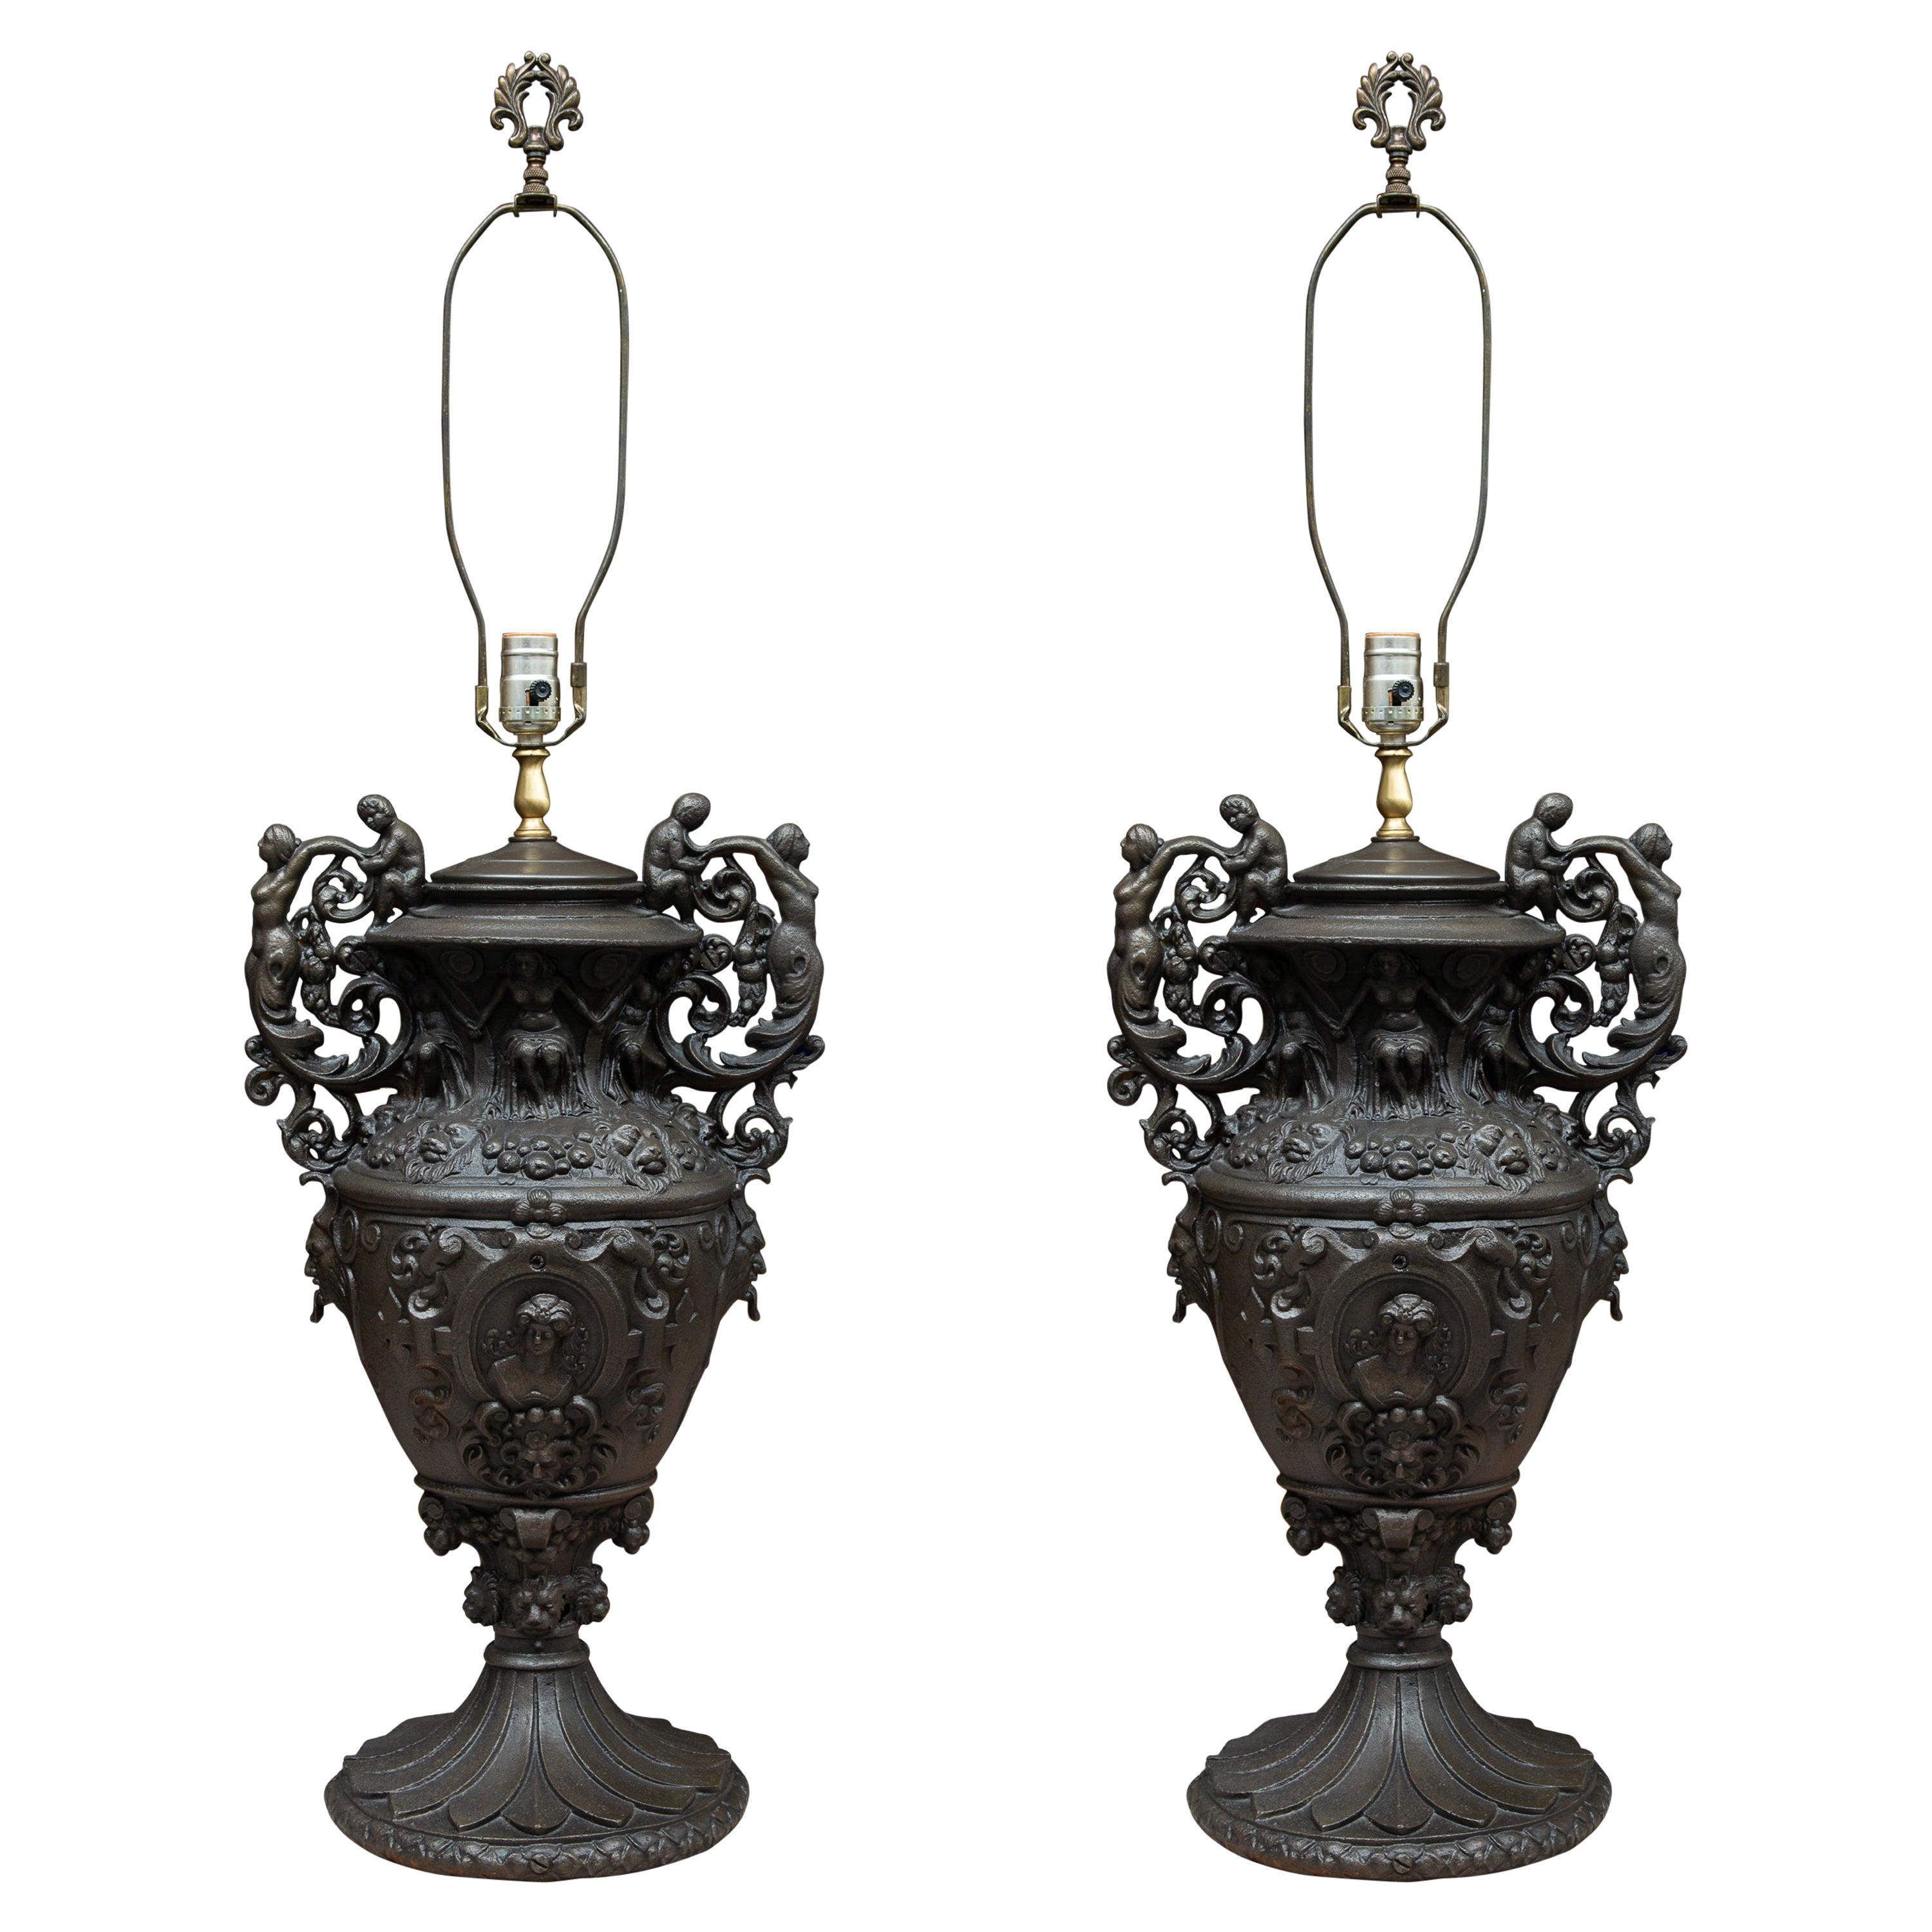 Custom Iron Table Lamp - Pair available For Sale